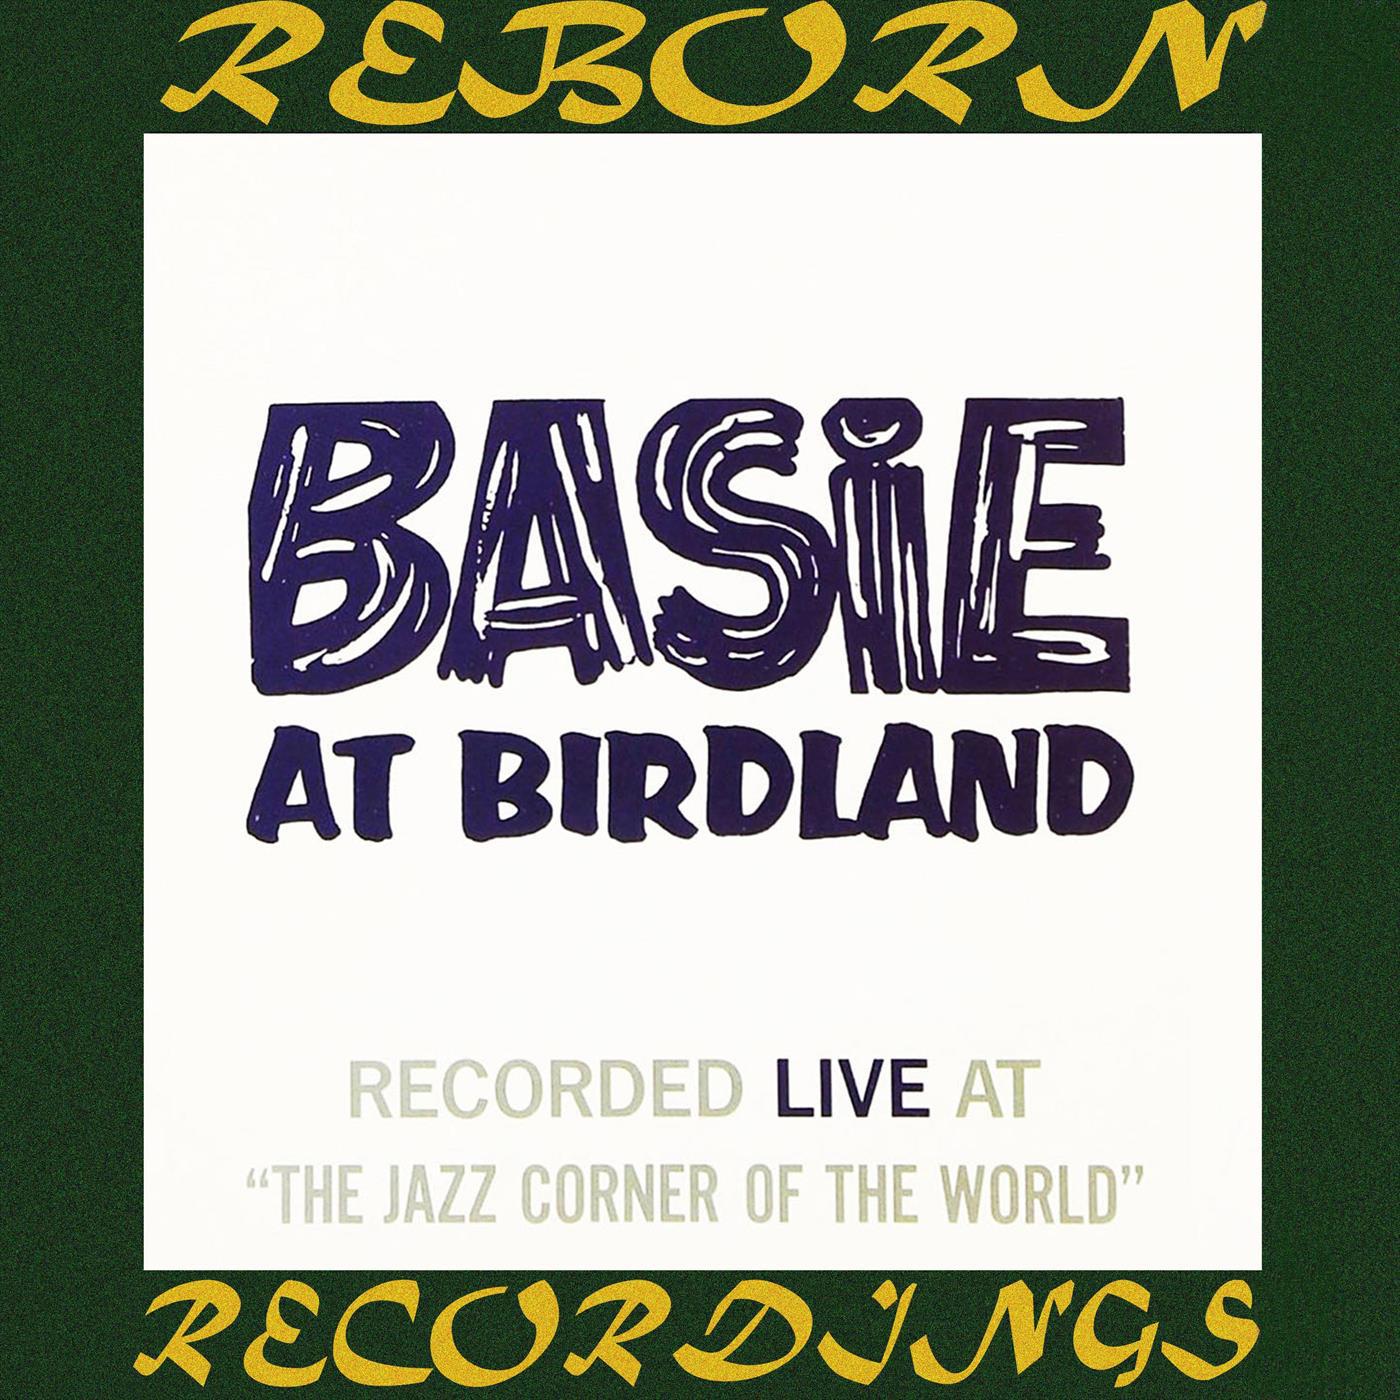 Basie At Birdland, The Complete Recordings (HD Remastered)